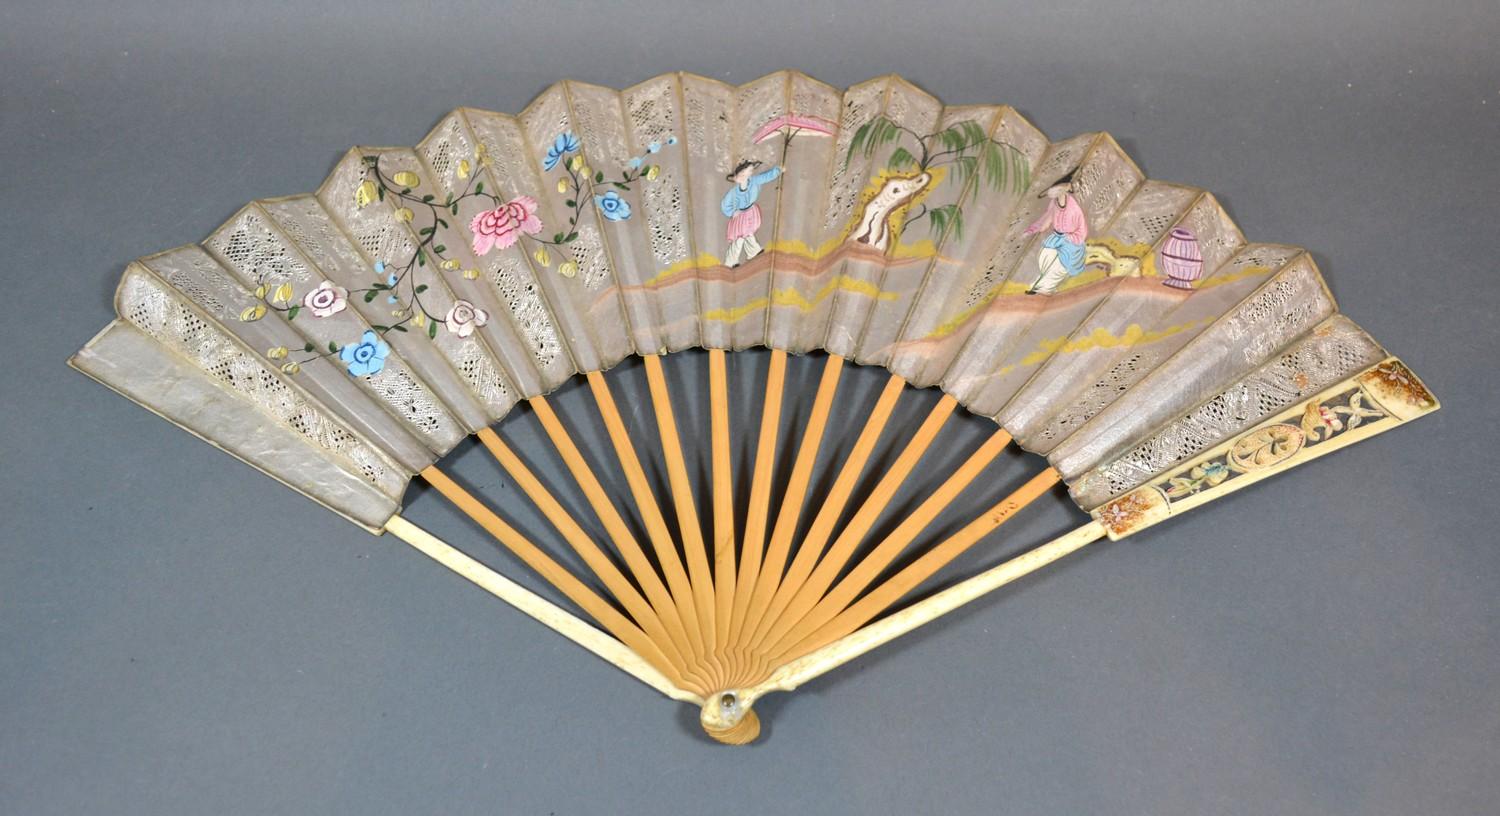 A 17th Century Silver Leafed Decoupe Fan with hand painted decoration depicting figures within a